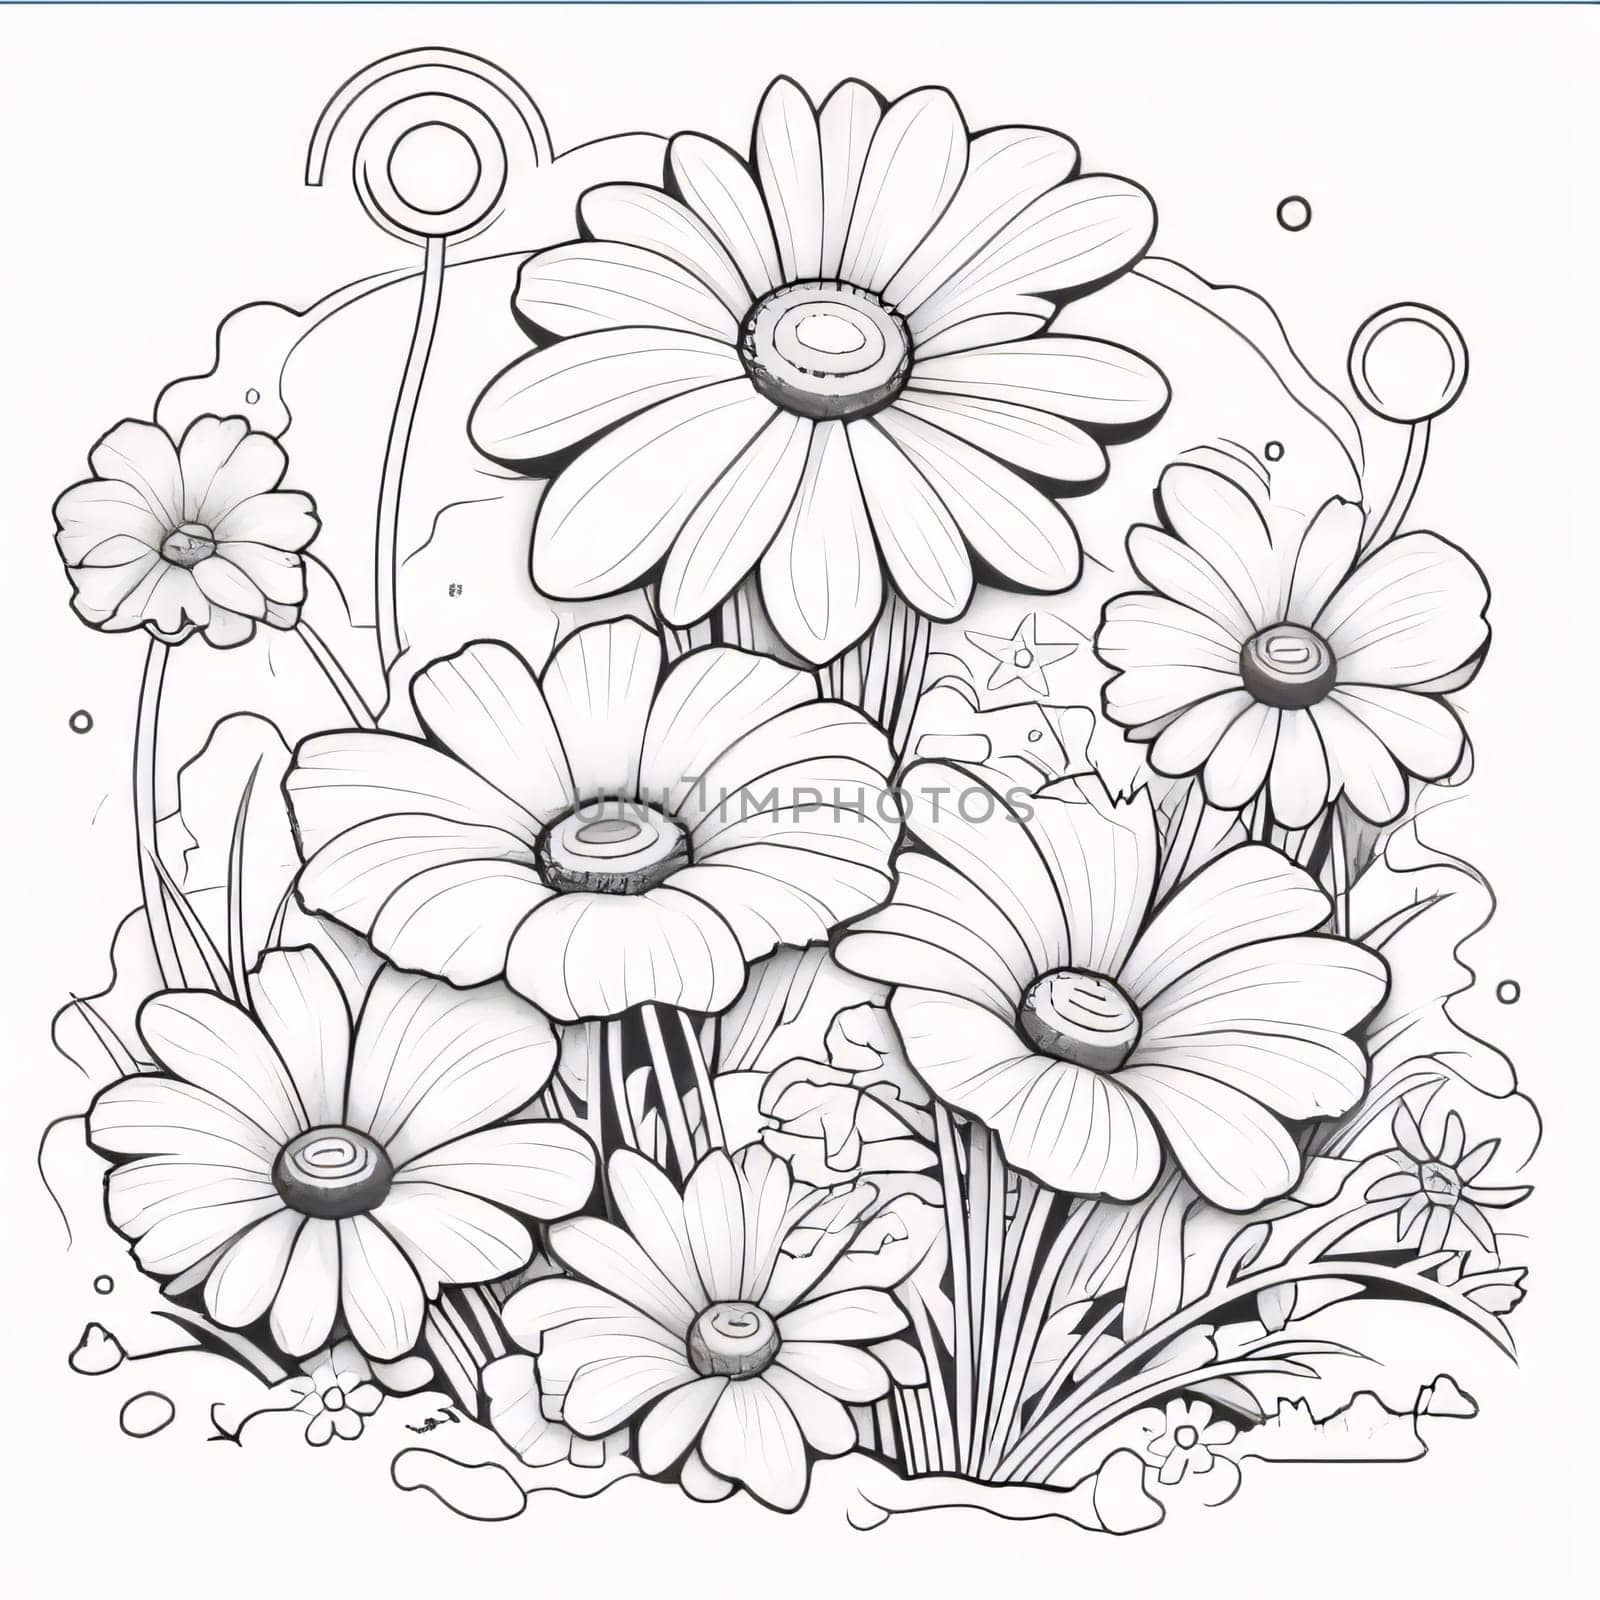 Black and white coloring sheet bouquet of flowers.Flowering flowers, a symbol of spring, new life. by ThemesS